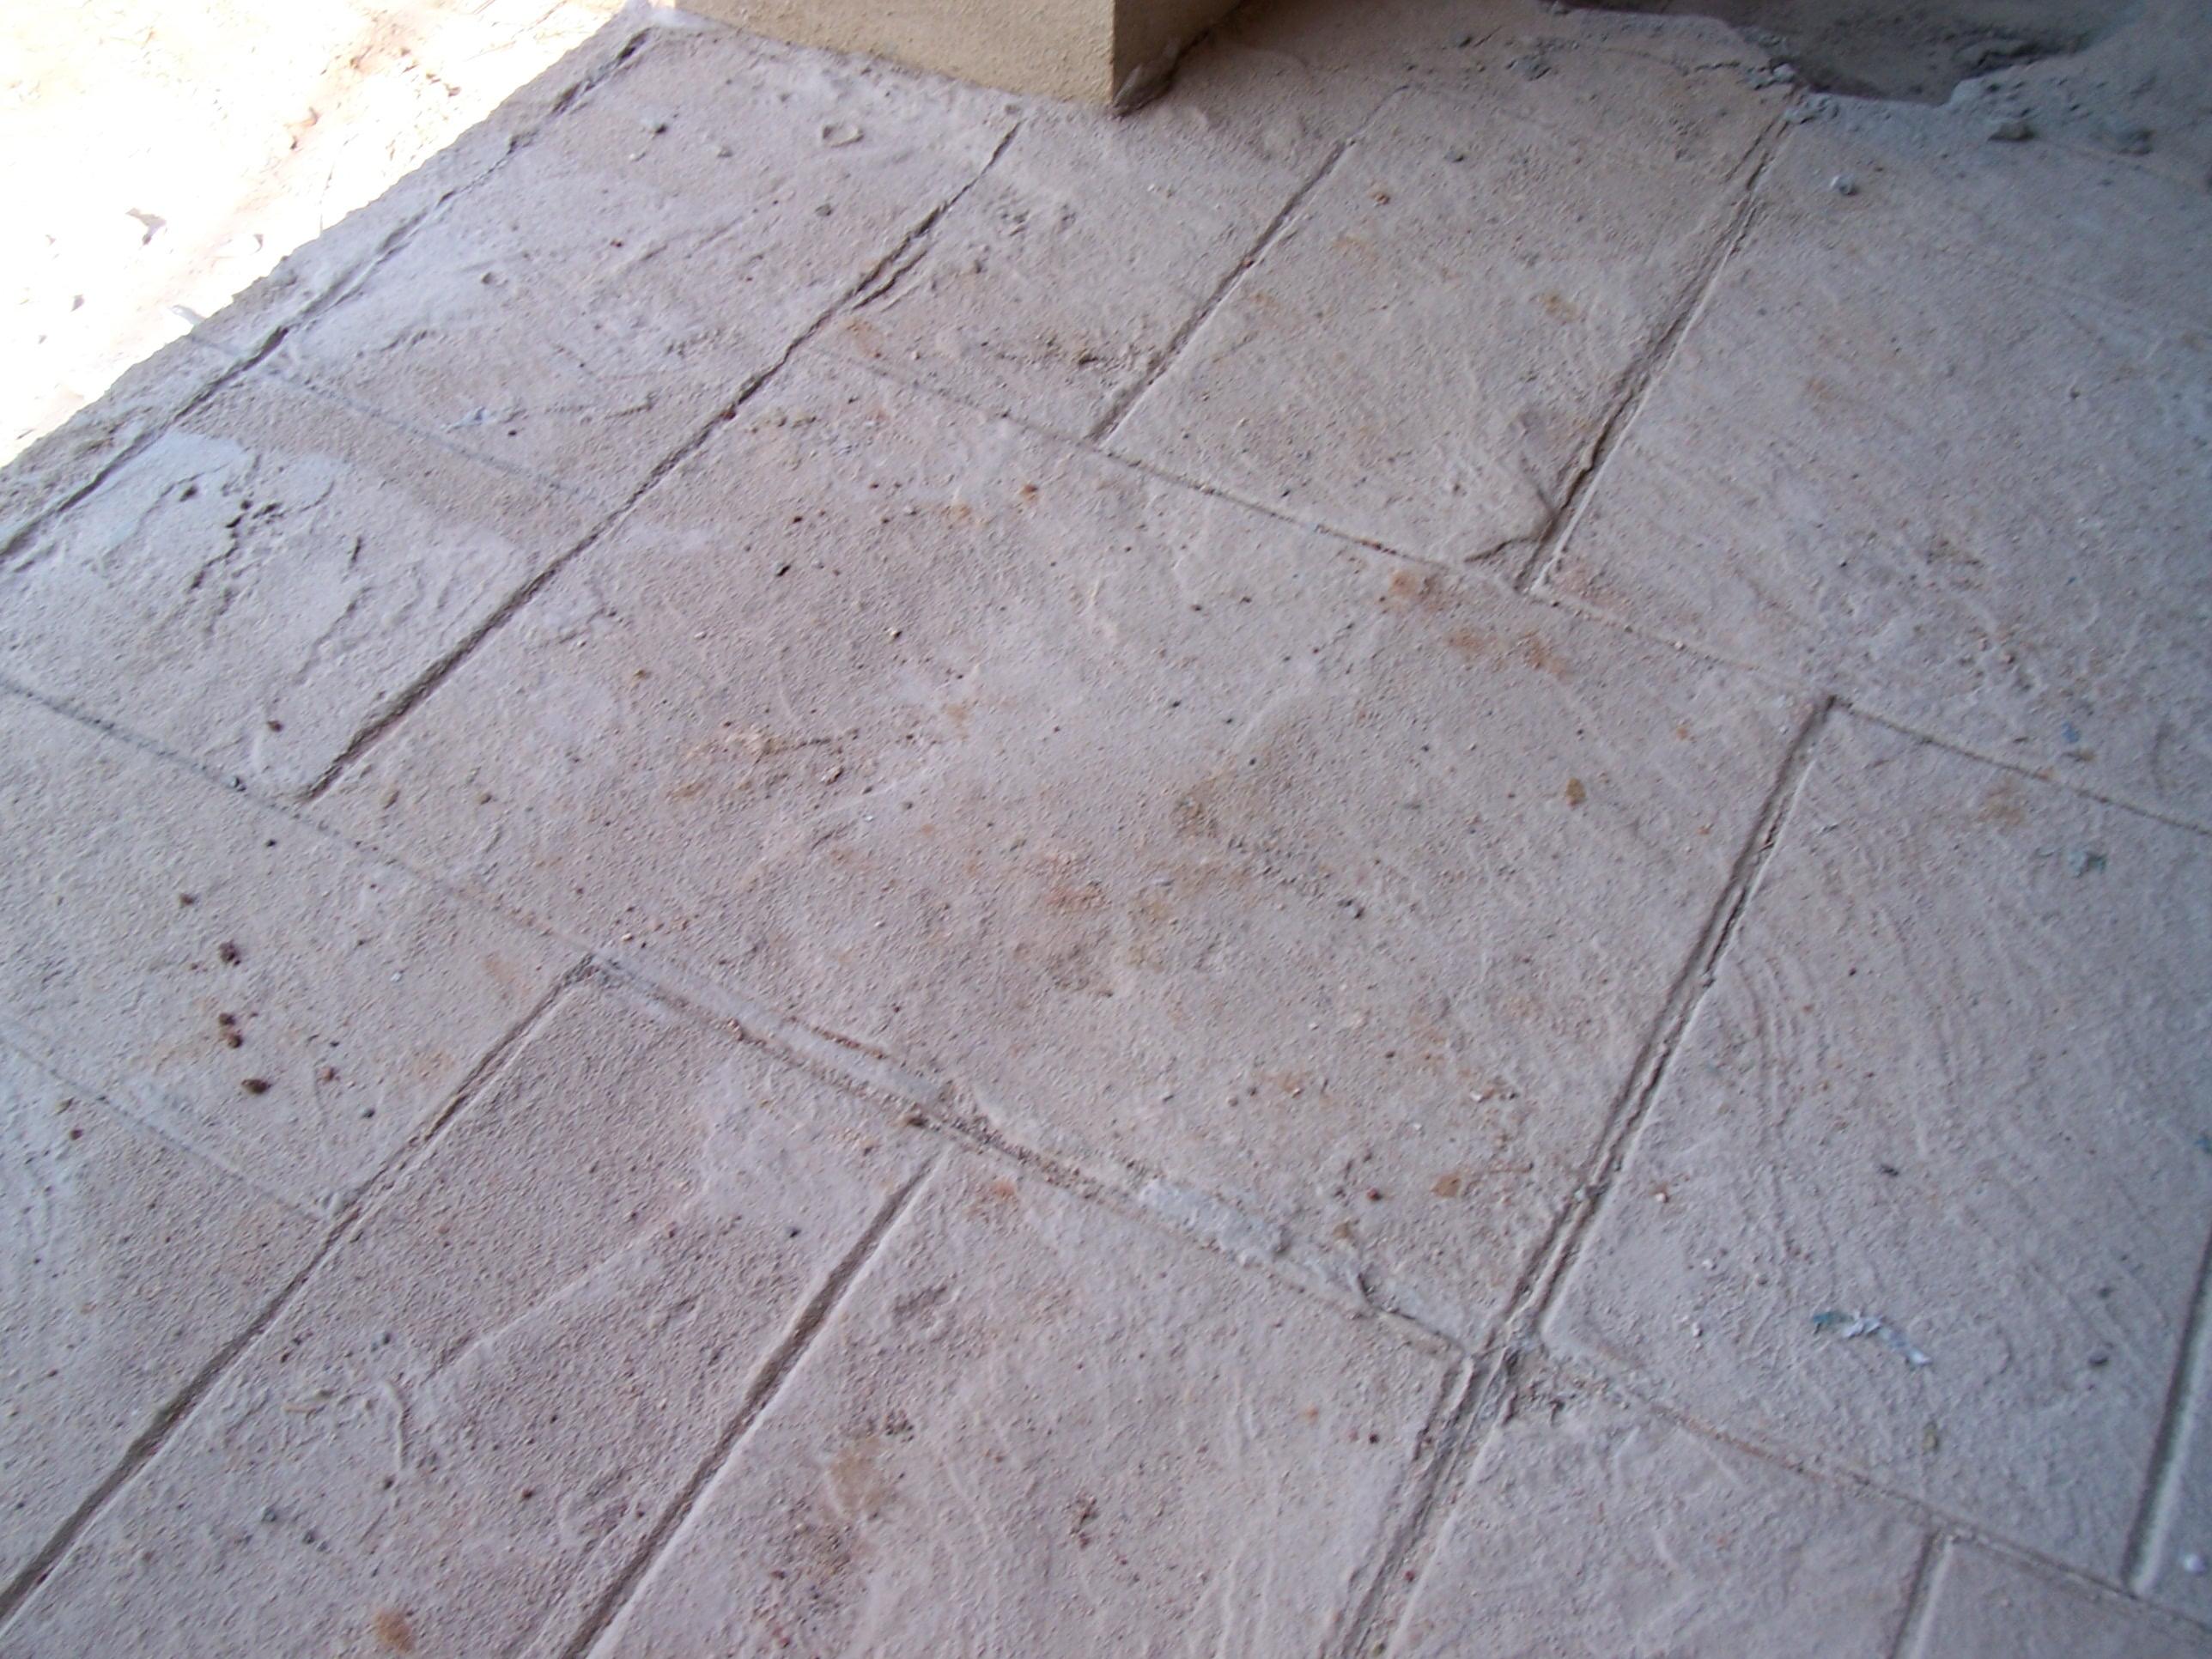 really rough photos and poor quality on the grout lines